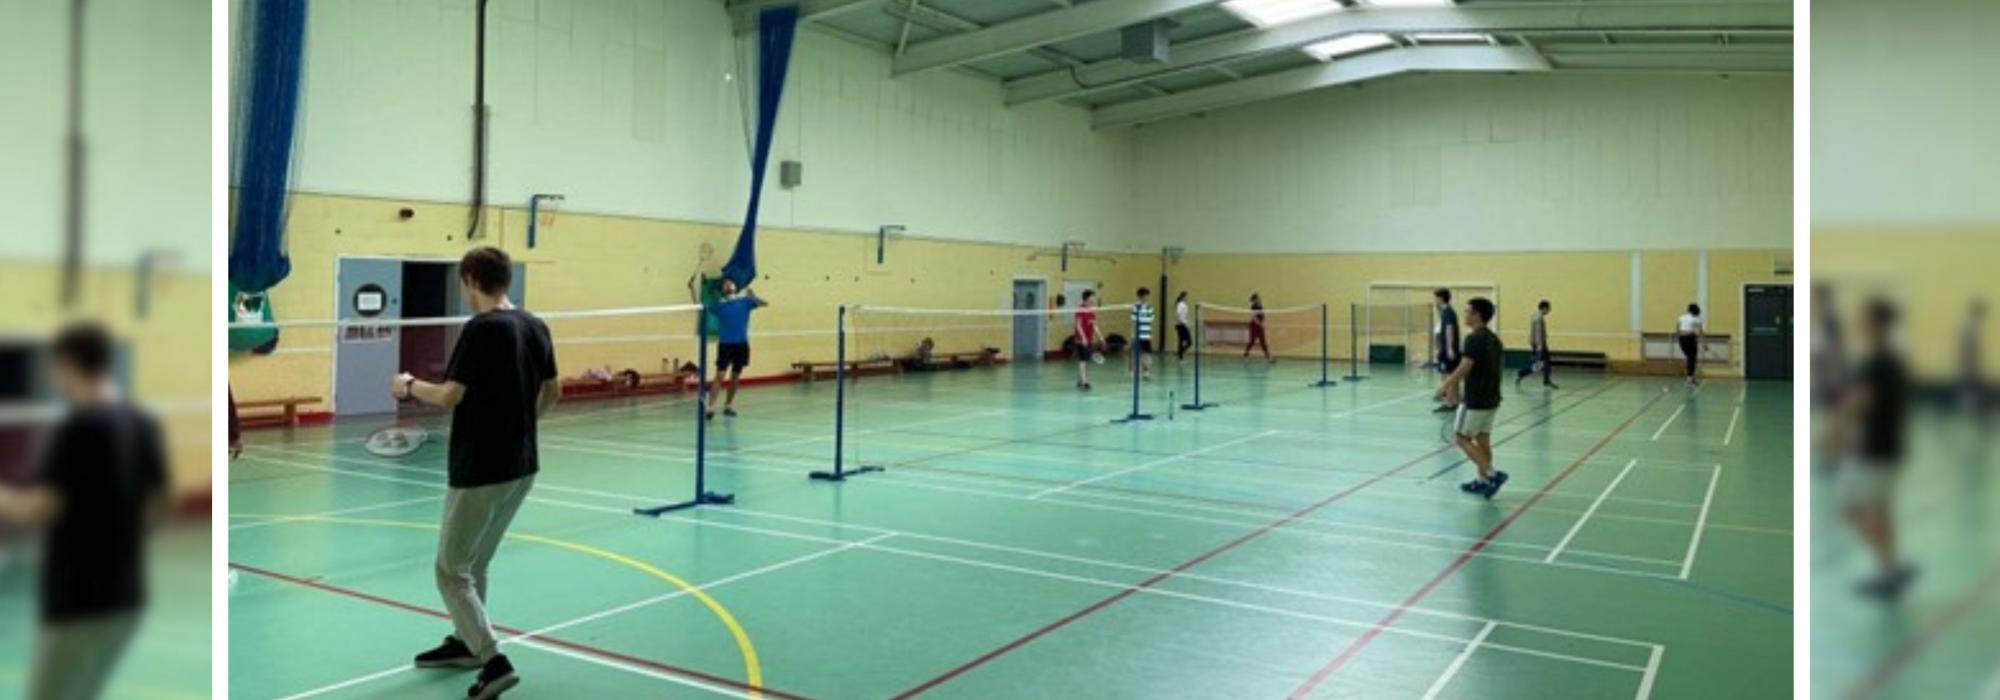 Badminton players practising on the courts